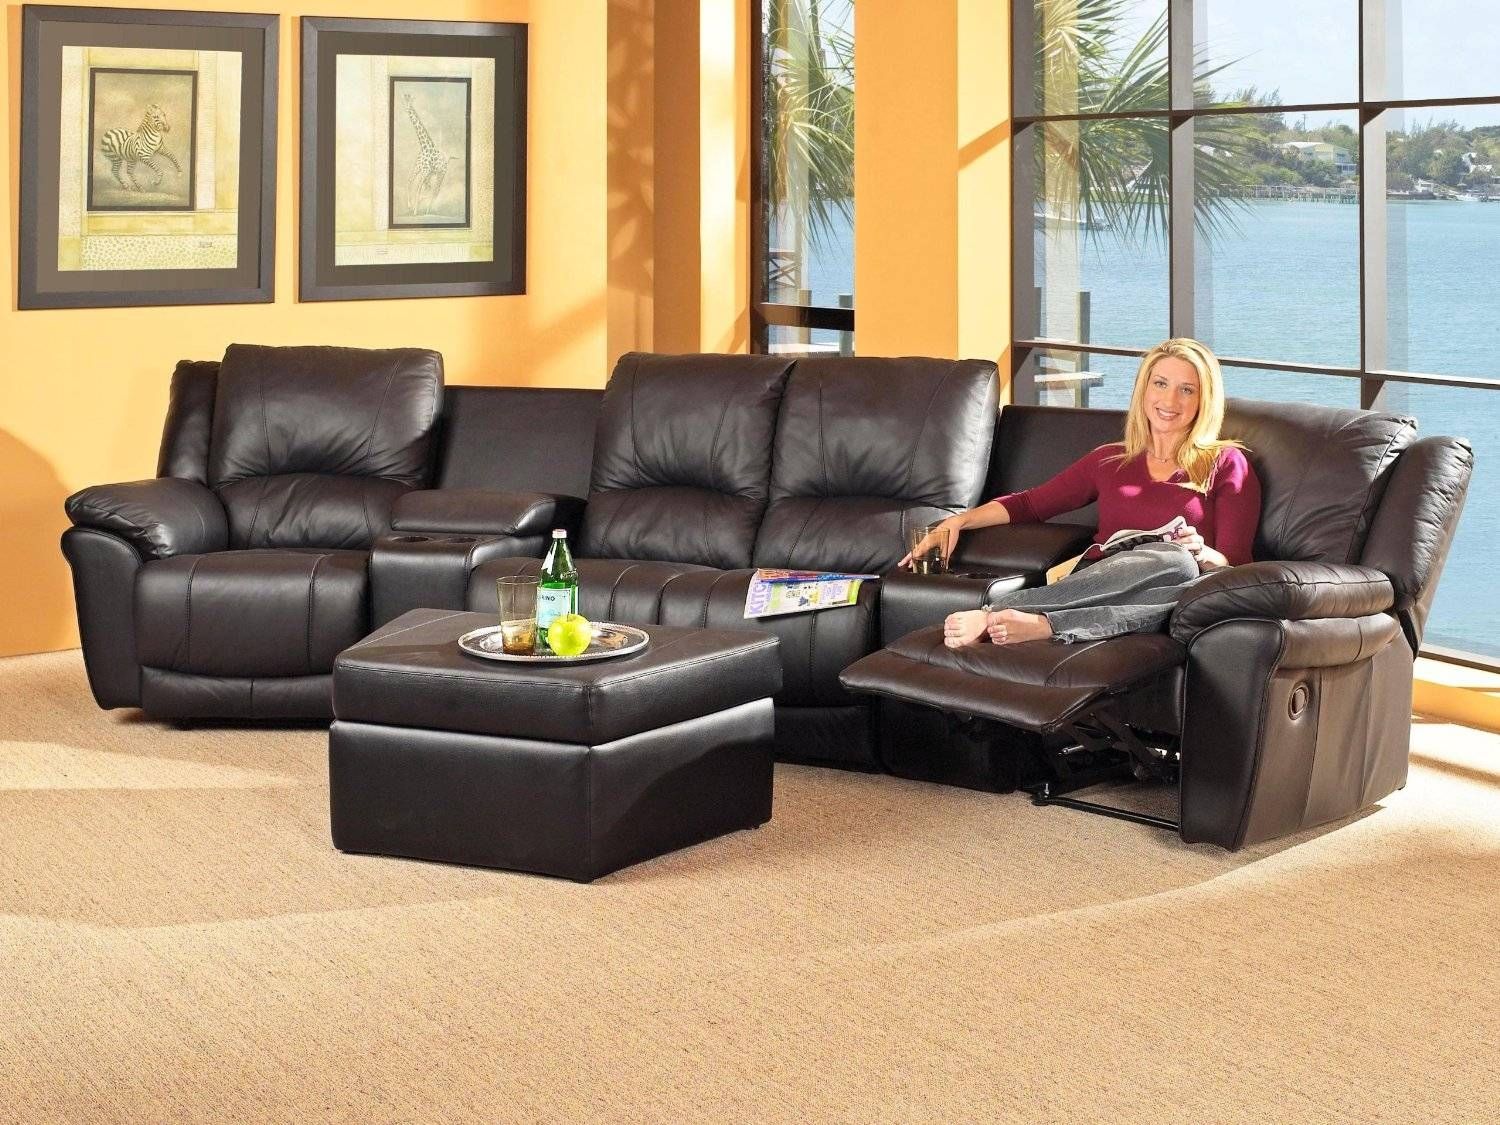 Trend Sectional Sofas Bay Area 77 In Petite Sectional Sofa With Inside Petite Sectional Sofas (View 3 of 15)